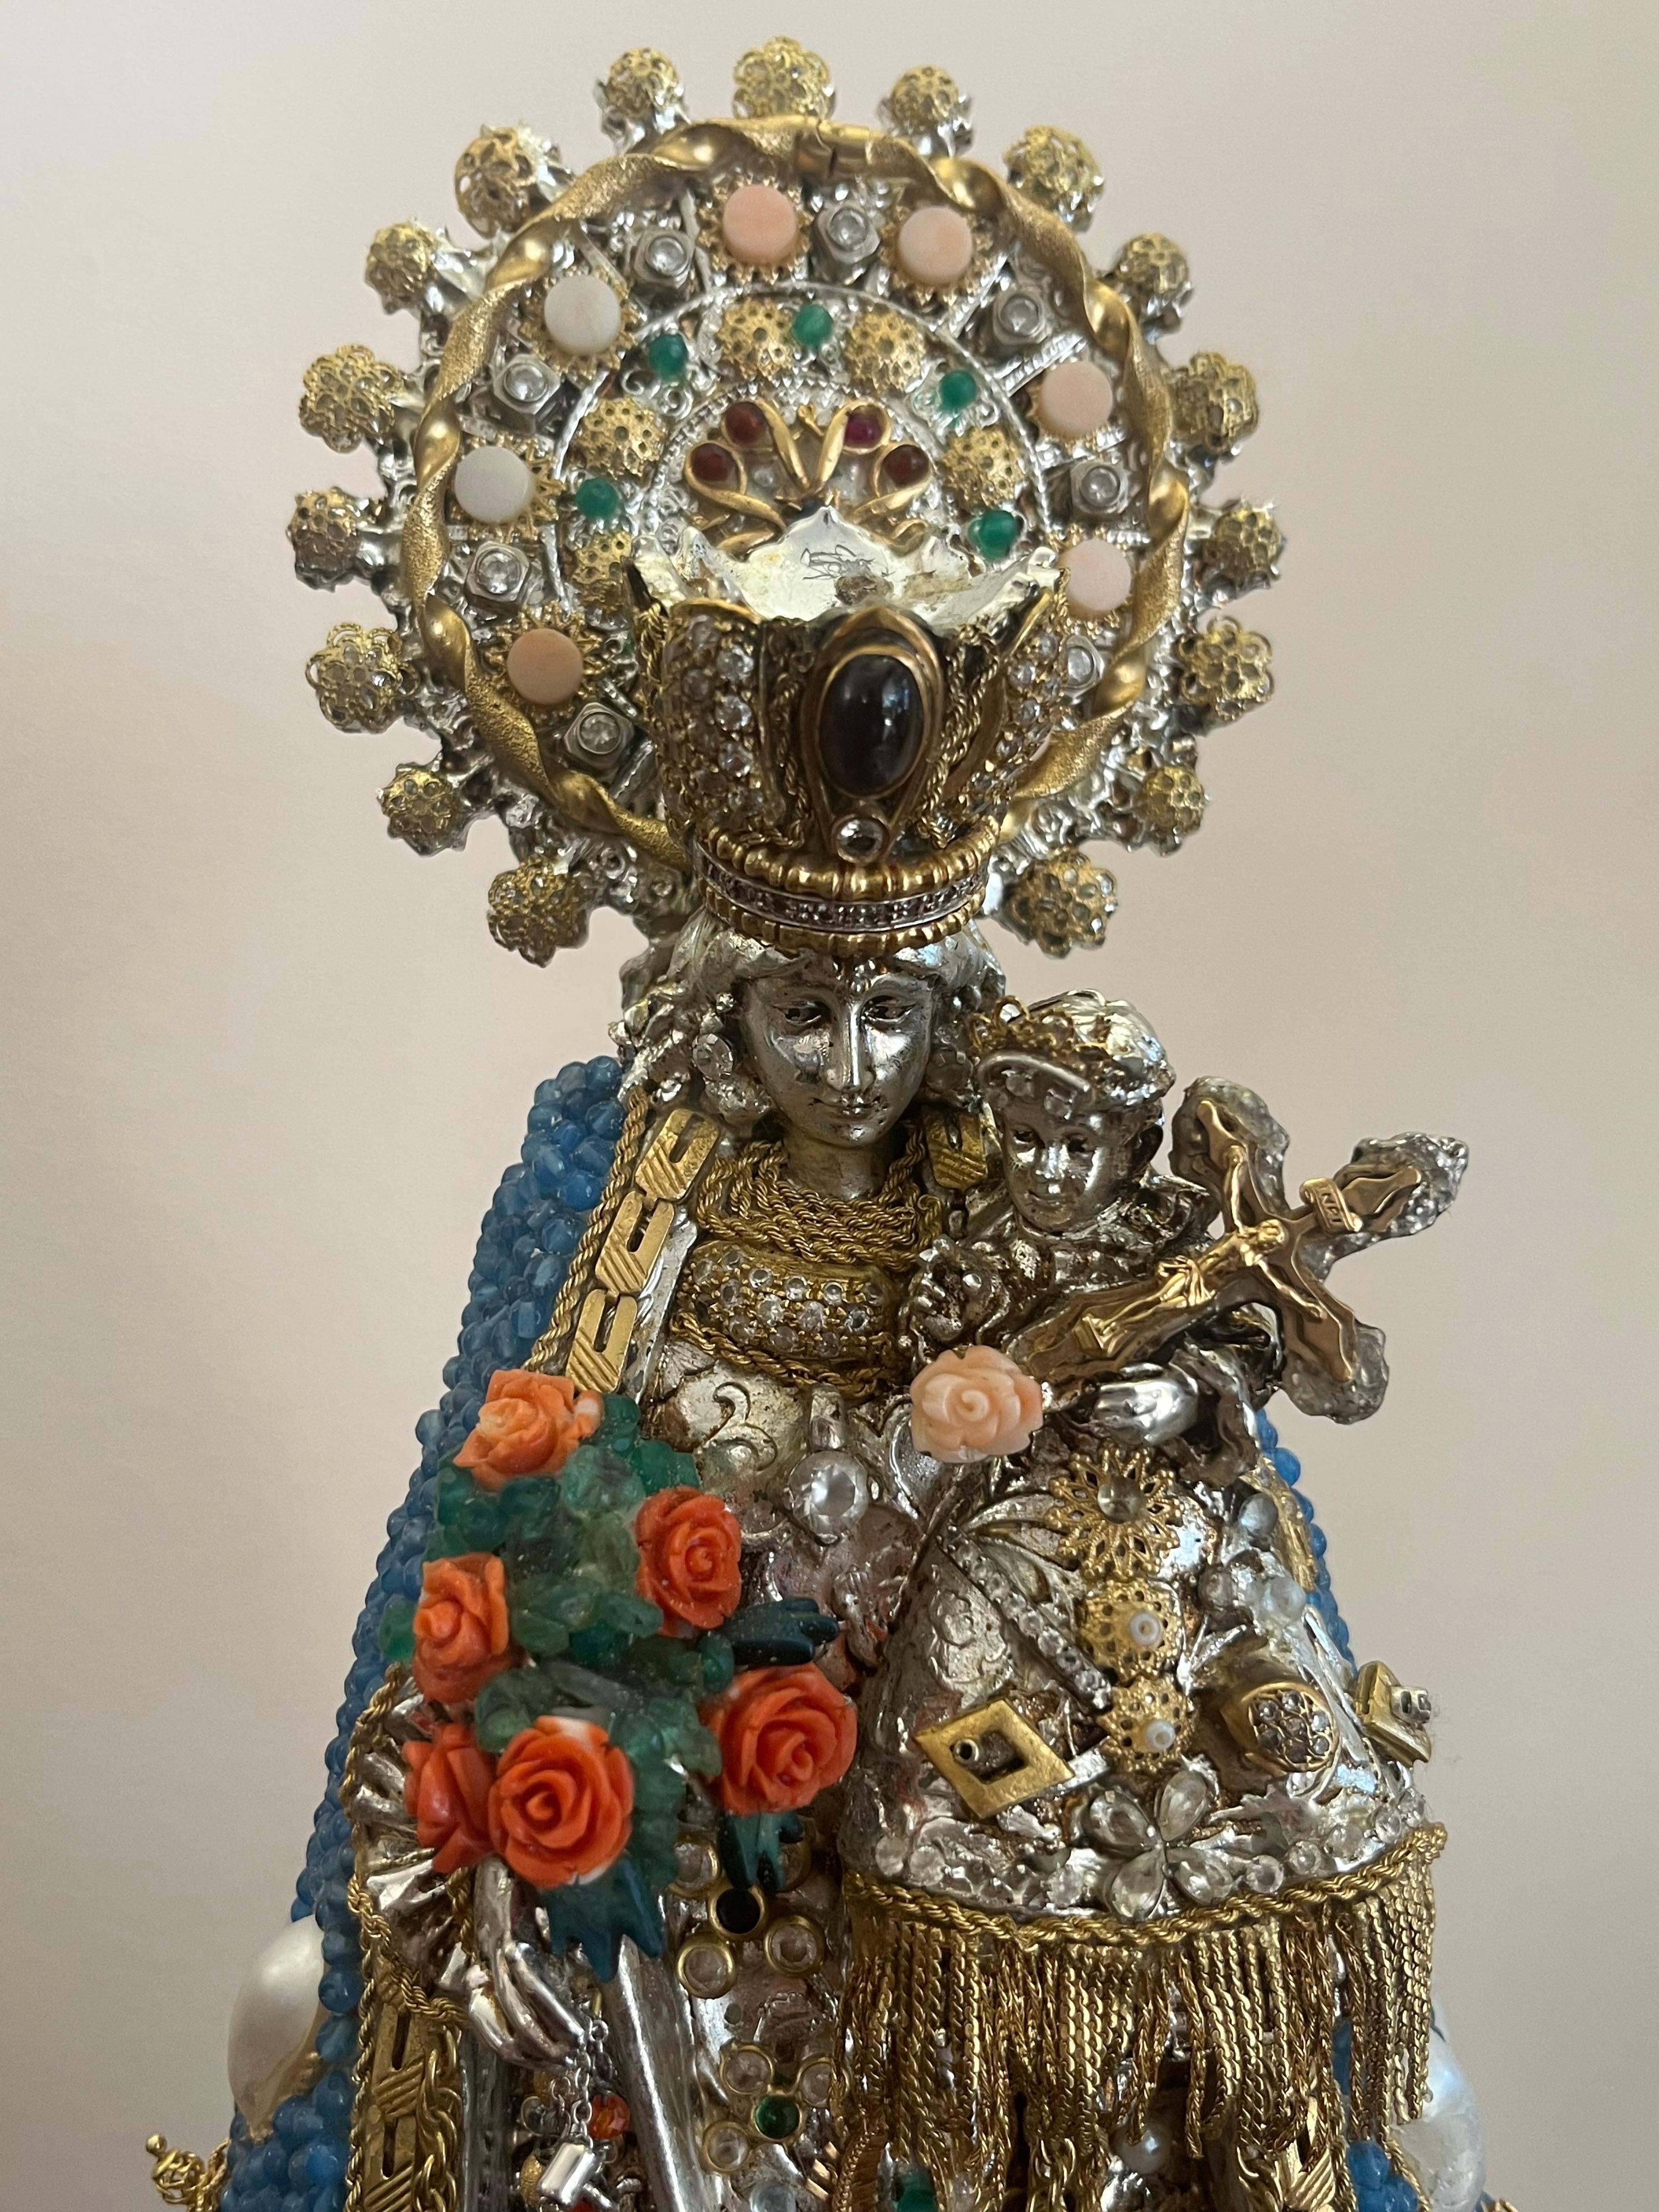 Statue De Nuestra Señora De Los Desamparados (The Virgin of the Forsaken) with 18Kt Gold Italy, 1980.
This Madonna is the protector of Valencia. My grandfather in 1990, on the occasion of a pilgrimage, bought the pewter statue. Being a goldsmith